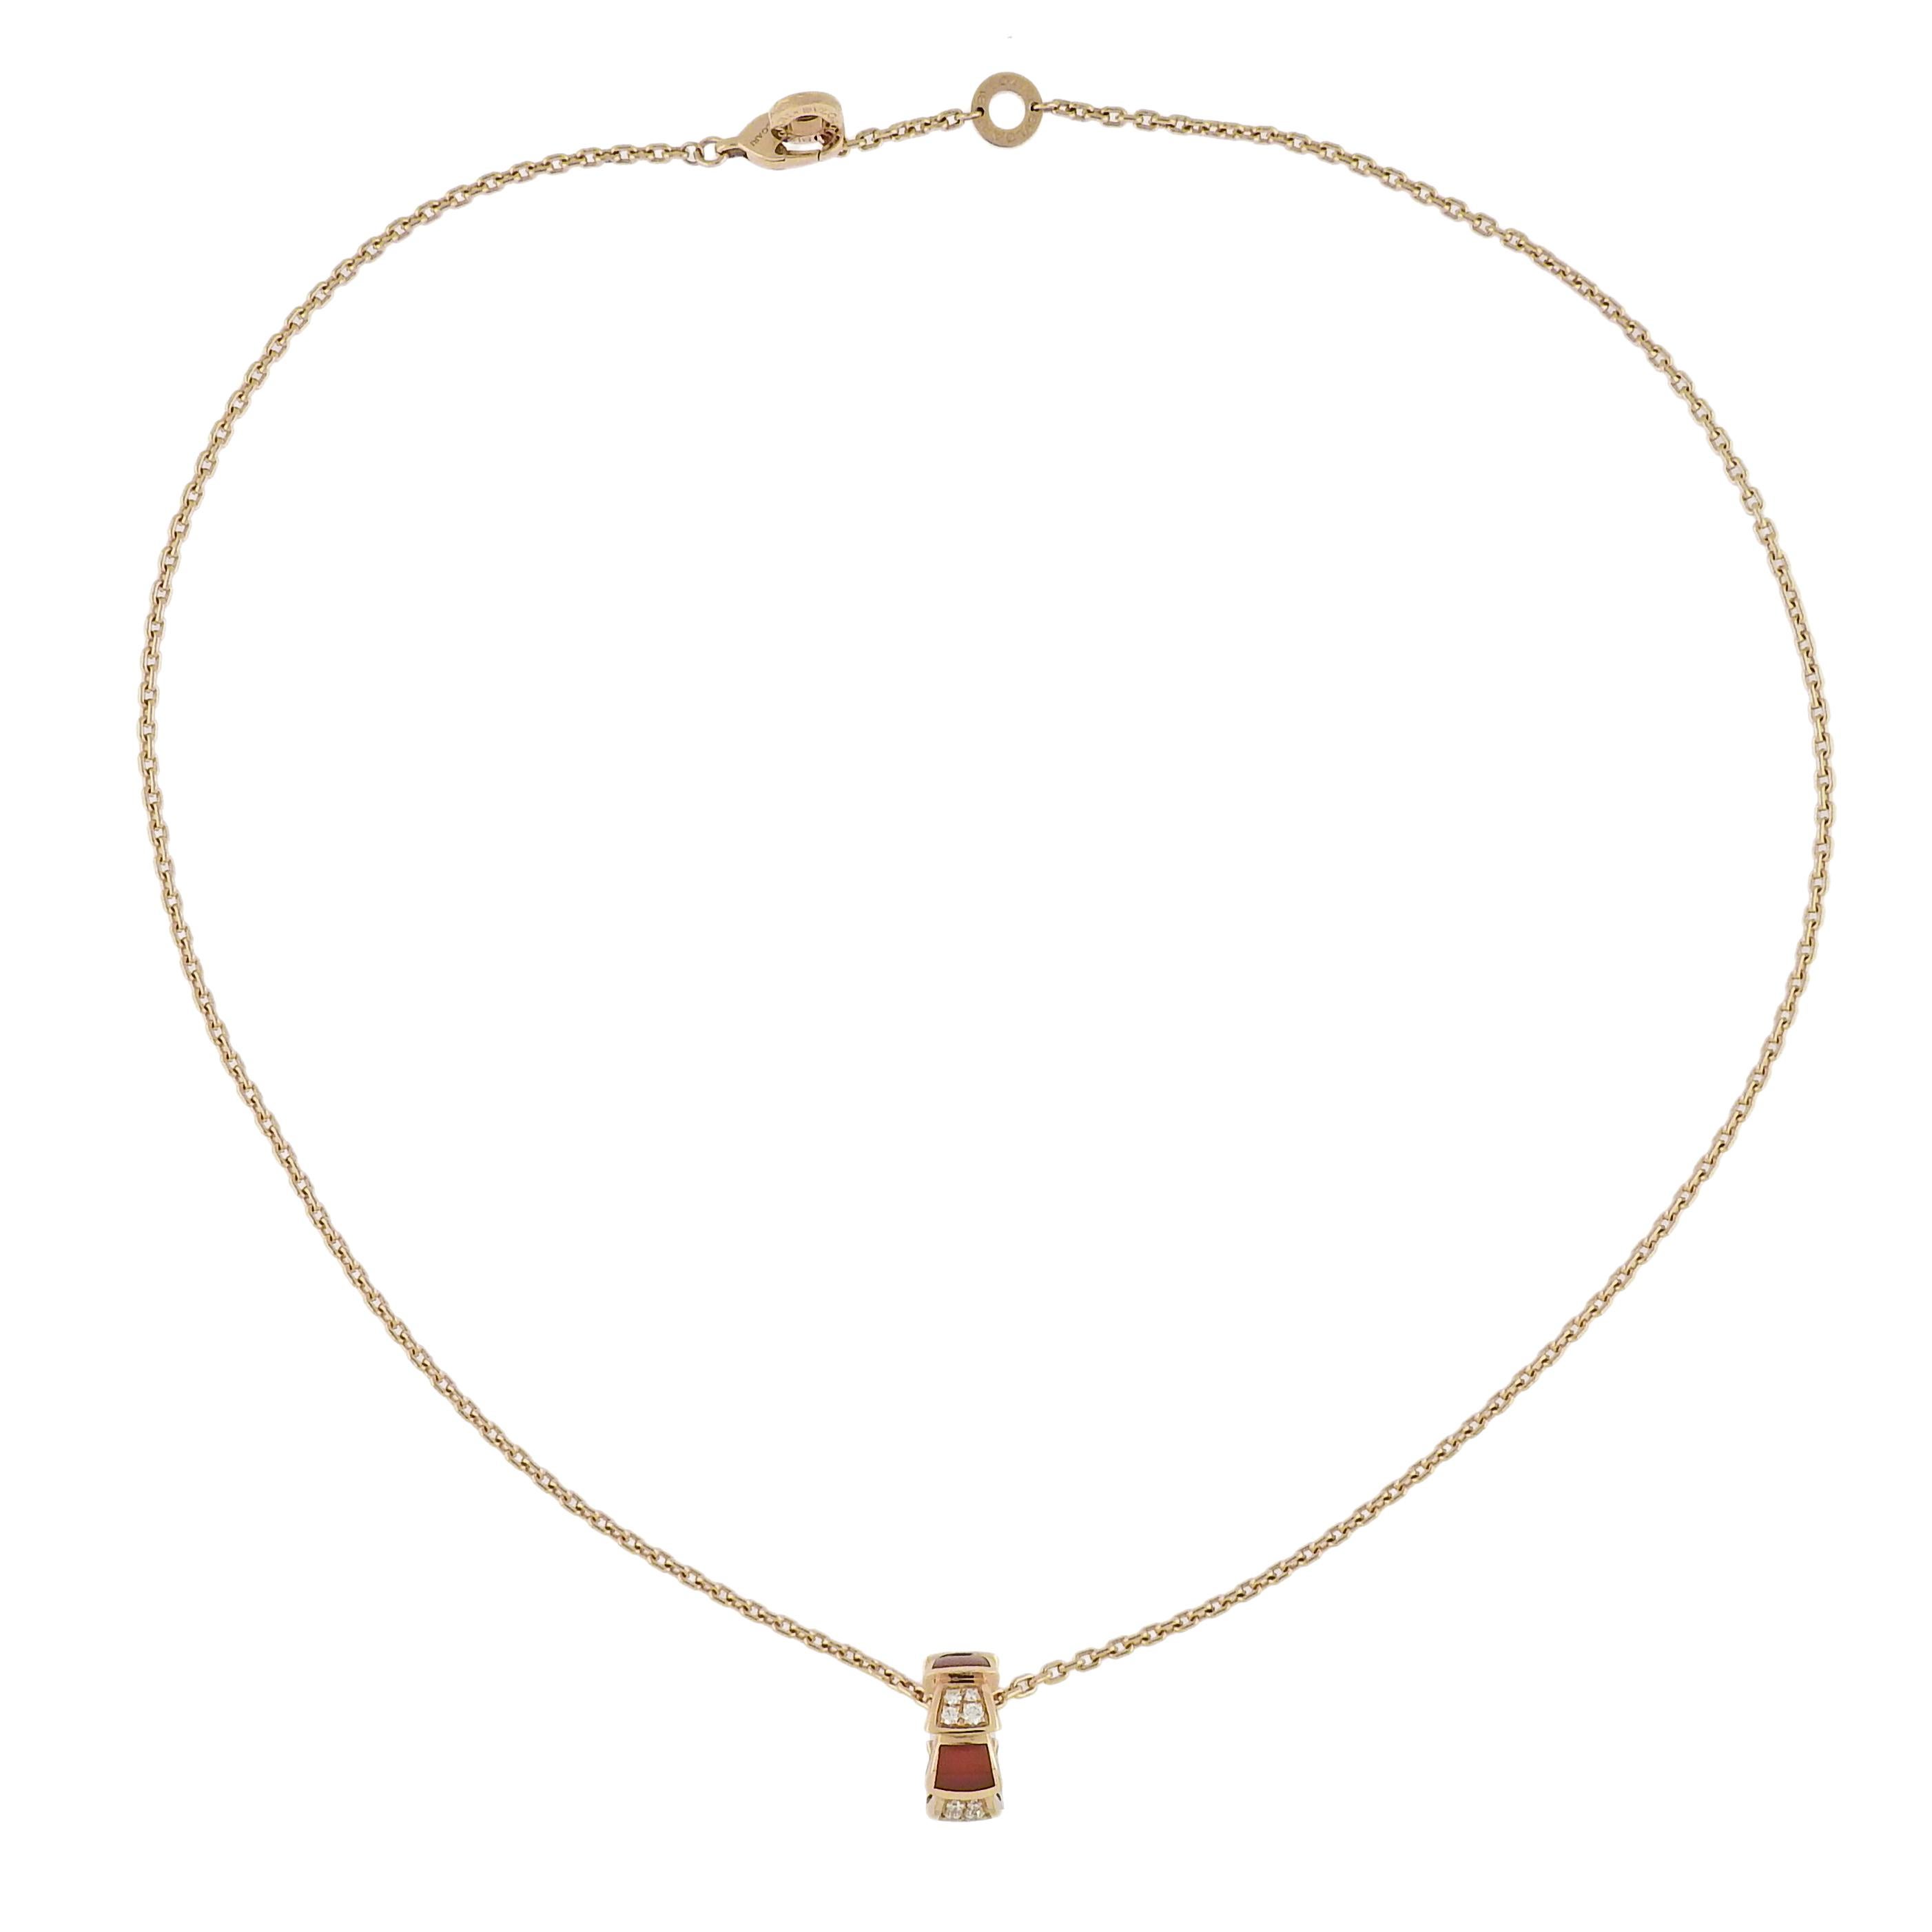 18k rose gold Serpenti Viper pendant necklace by Bvlgari, with 0.21ctw G/VS diamonds and carnelian. Retail $5550. Comes with COA and box. Necklace is 17.25